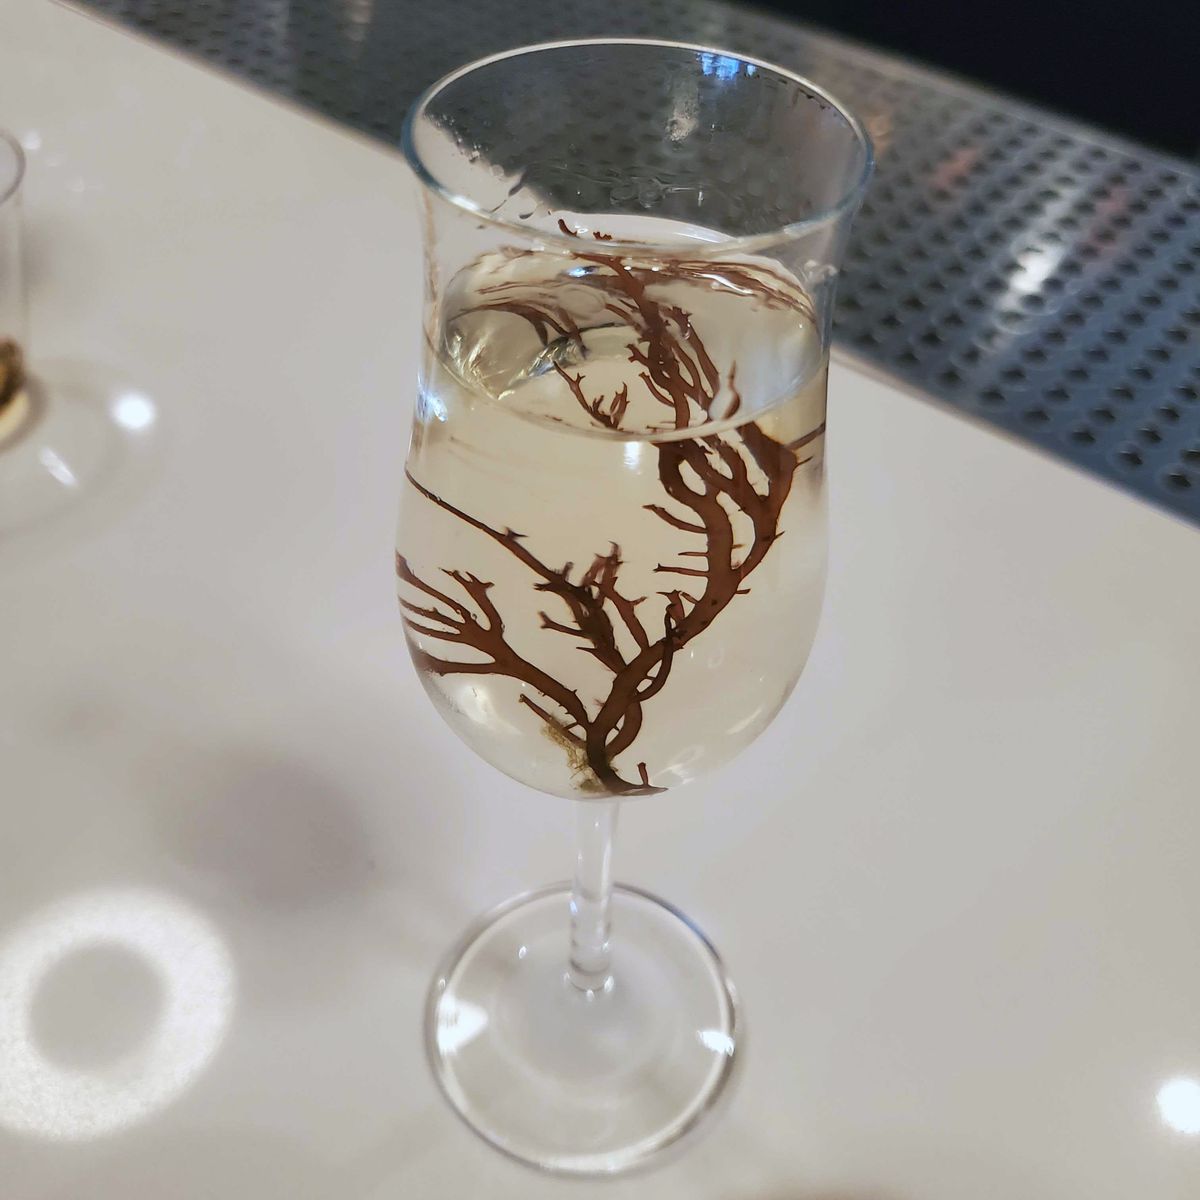 A single piece of red seaweed floats inside a stemmed sherry glass in the Salty Feelings cocktail from Bar Iris in San Francisco.